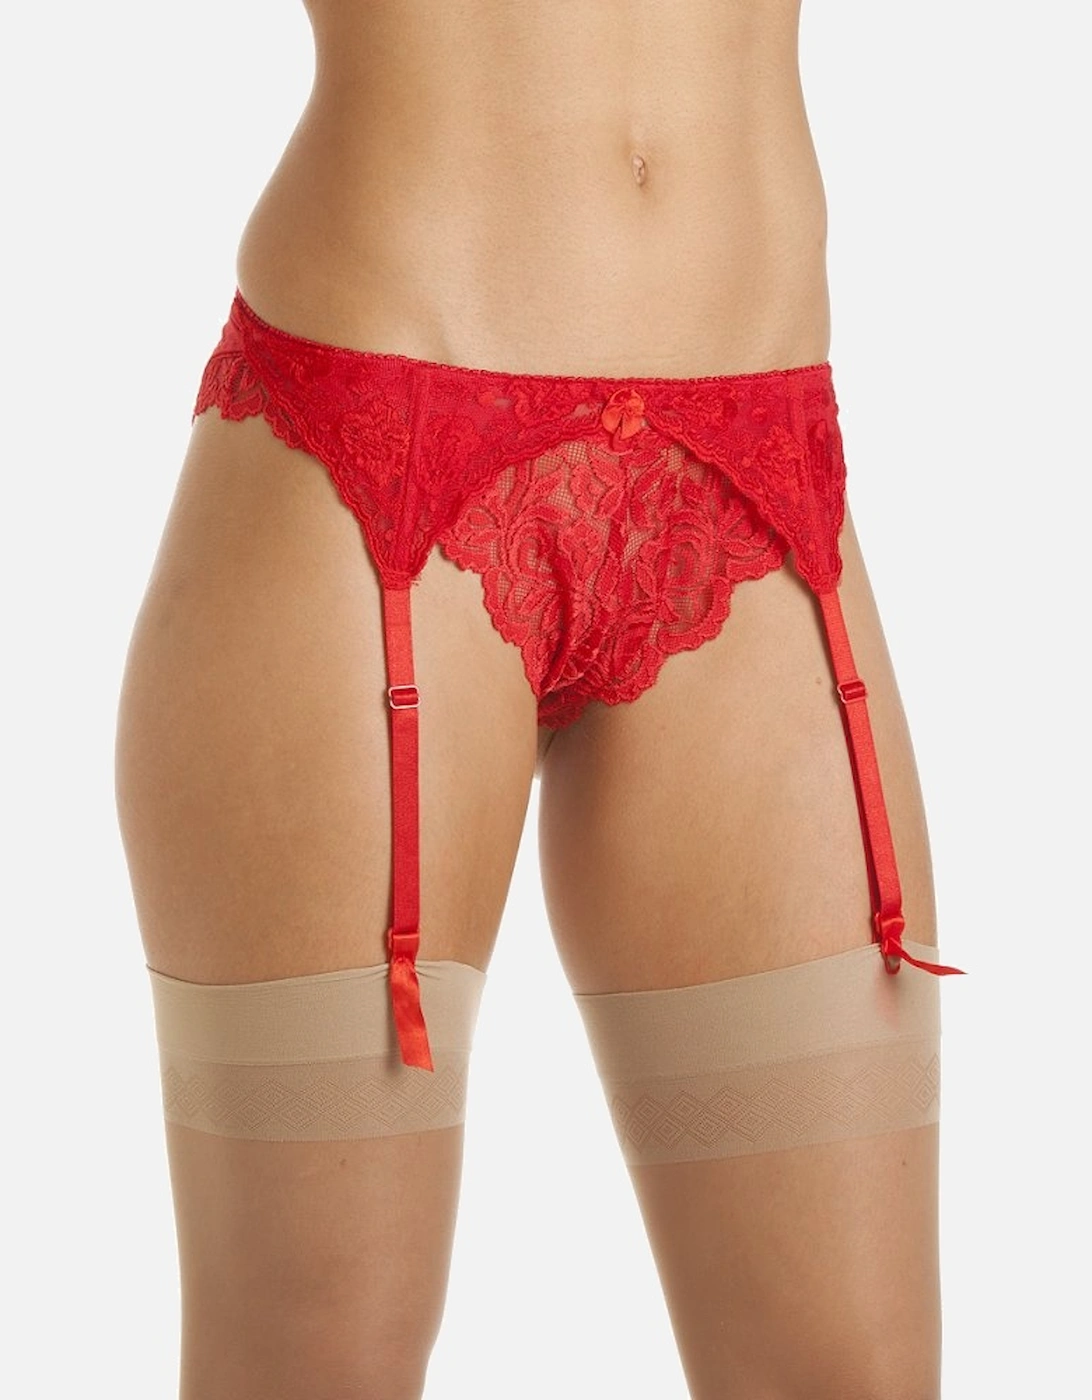 Red Narrow Lace Suspender Belt